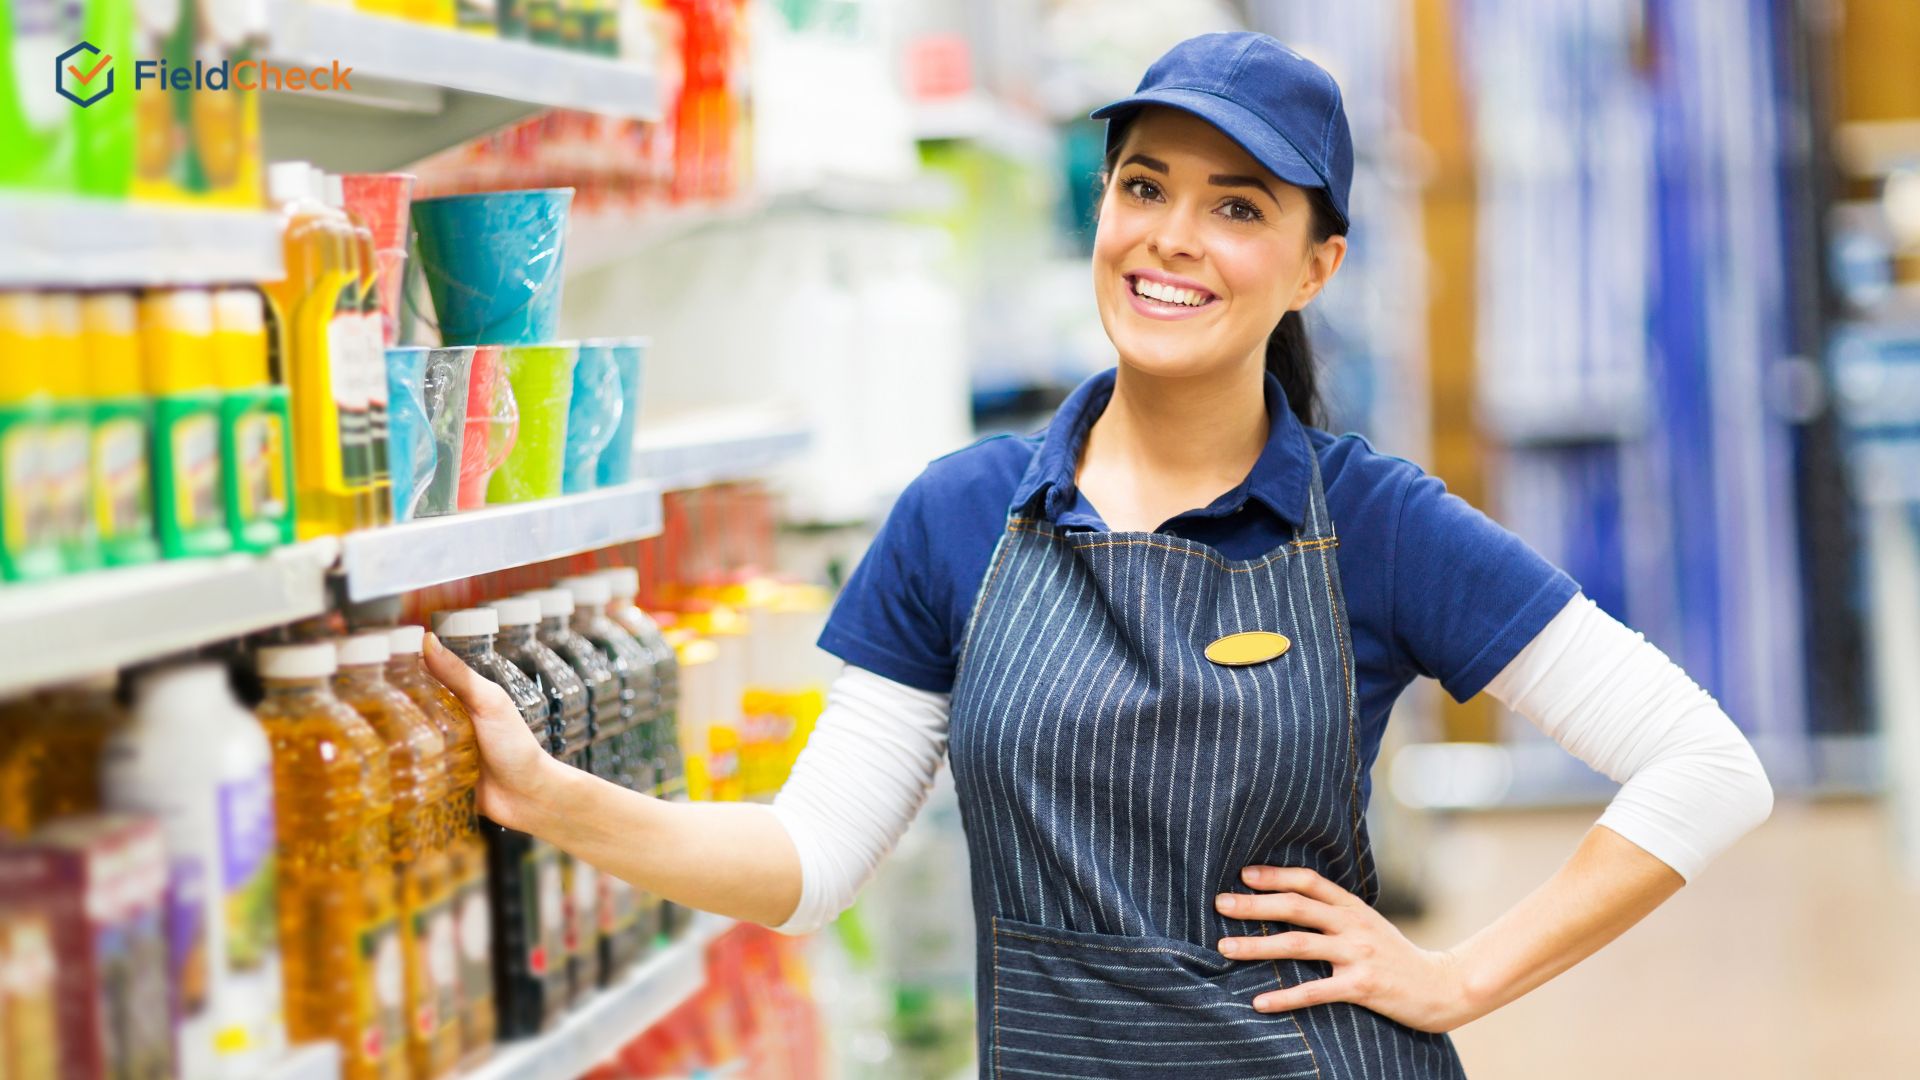 6 Biggest Challenges For Retail Store Operations In 2023